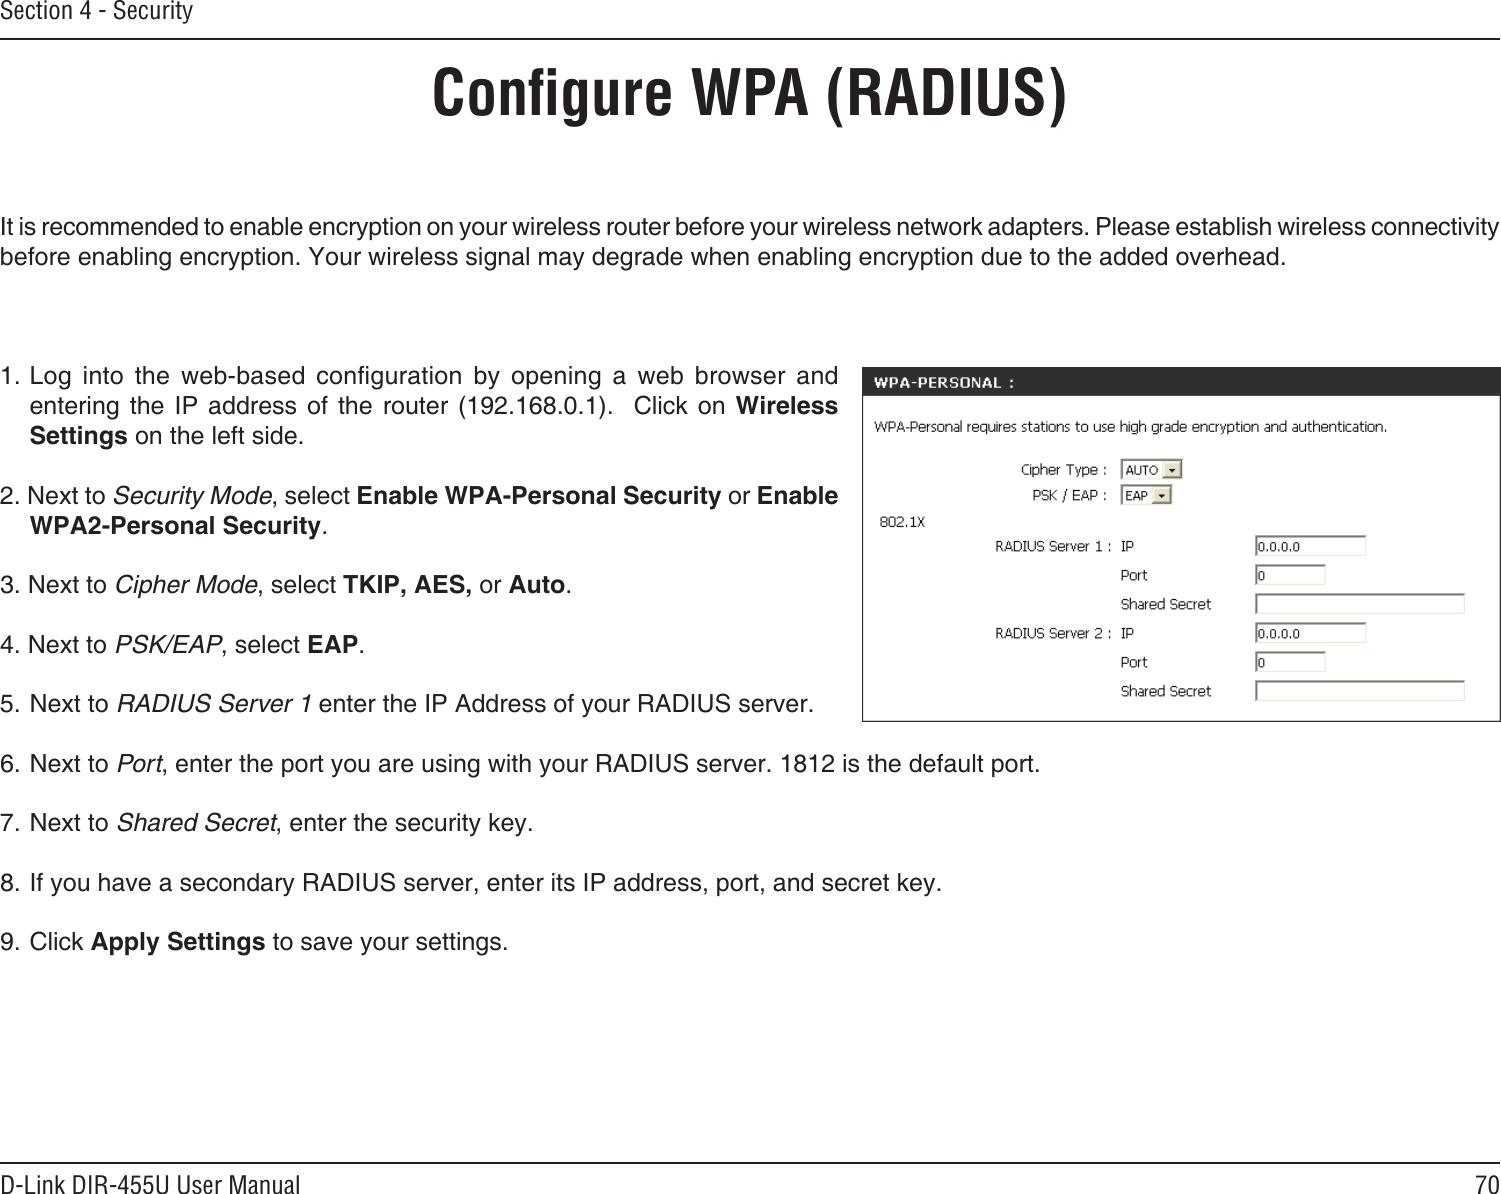 70D-Link DIR-455U User ManualSection 4 - SecurityConﬁgure WPA (RADIUS)It is recommended to enable encryption on your wireless router before your wireless network adapters. Please establish wireless connectivity before enabling encryption. Your wireless signal may degrade when enabling encryption due to the added overhead.1. Log  into  the  web-based  conguration  by  opening  a  web  browser  and entering  the  IP  address  of  the router  (192.168.0.1).   Click on  Wireless Settings on the left side.2. Next to Security Mode, select Enable WPA-Personal Security or Enable WPA2-Personal Security.3. Next to Cipher Mode, select TKIP, AES, or Auto.4. Next to PSK/EAP, select EAP.5. Next to RADIUS Server 1 enter the IP Address of your RADIUS server.6. Next to Port, enter the port you are using with your RADIUS server. 1812 is the default port.7. Next to Shared Secret, enter the security key.8. If you have a secondary RADIUS server, enter its IP address, port, and secret key.9. Click Apply Settings to save your settings.